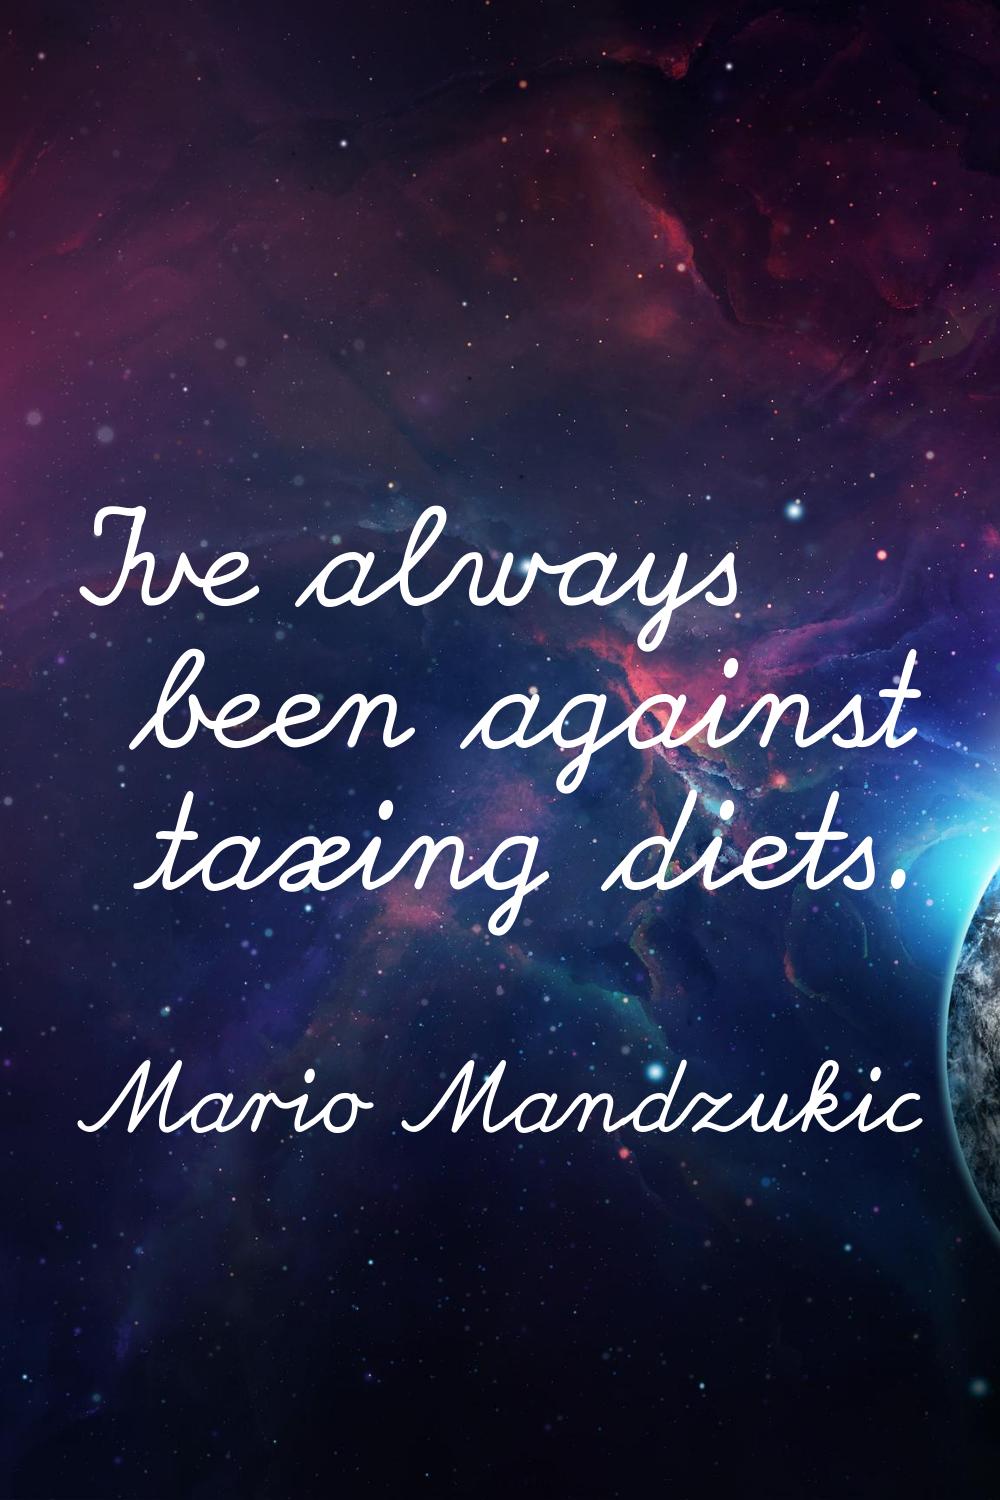 I've always been against taxing diets.